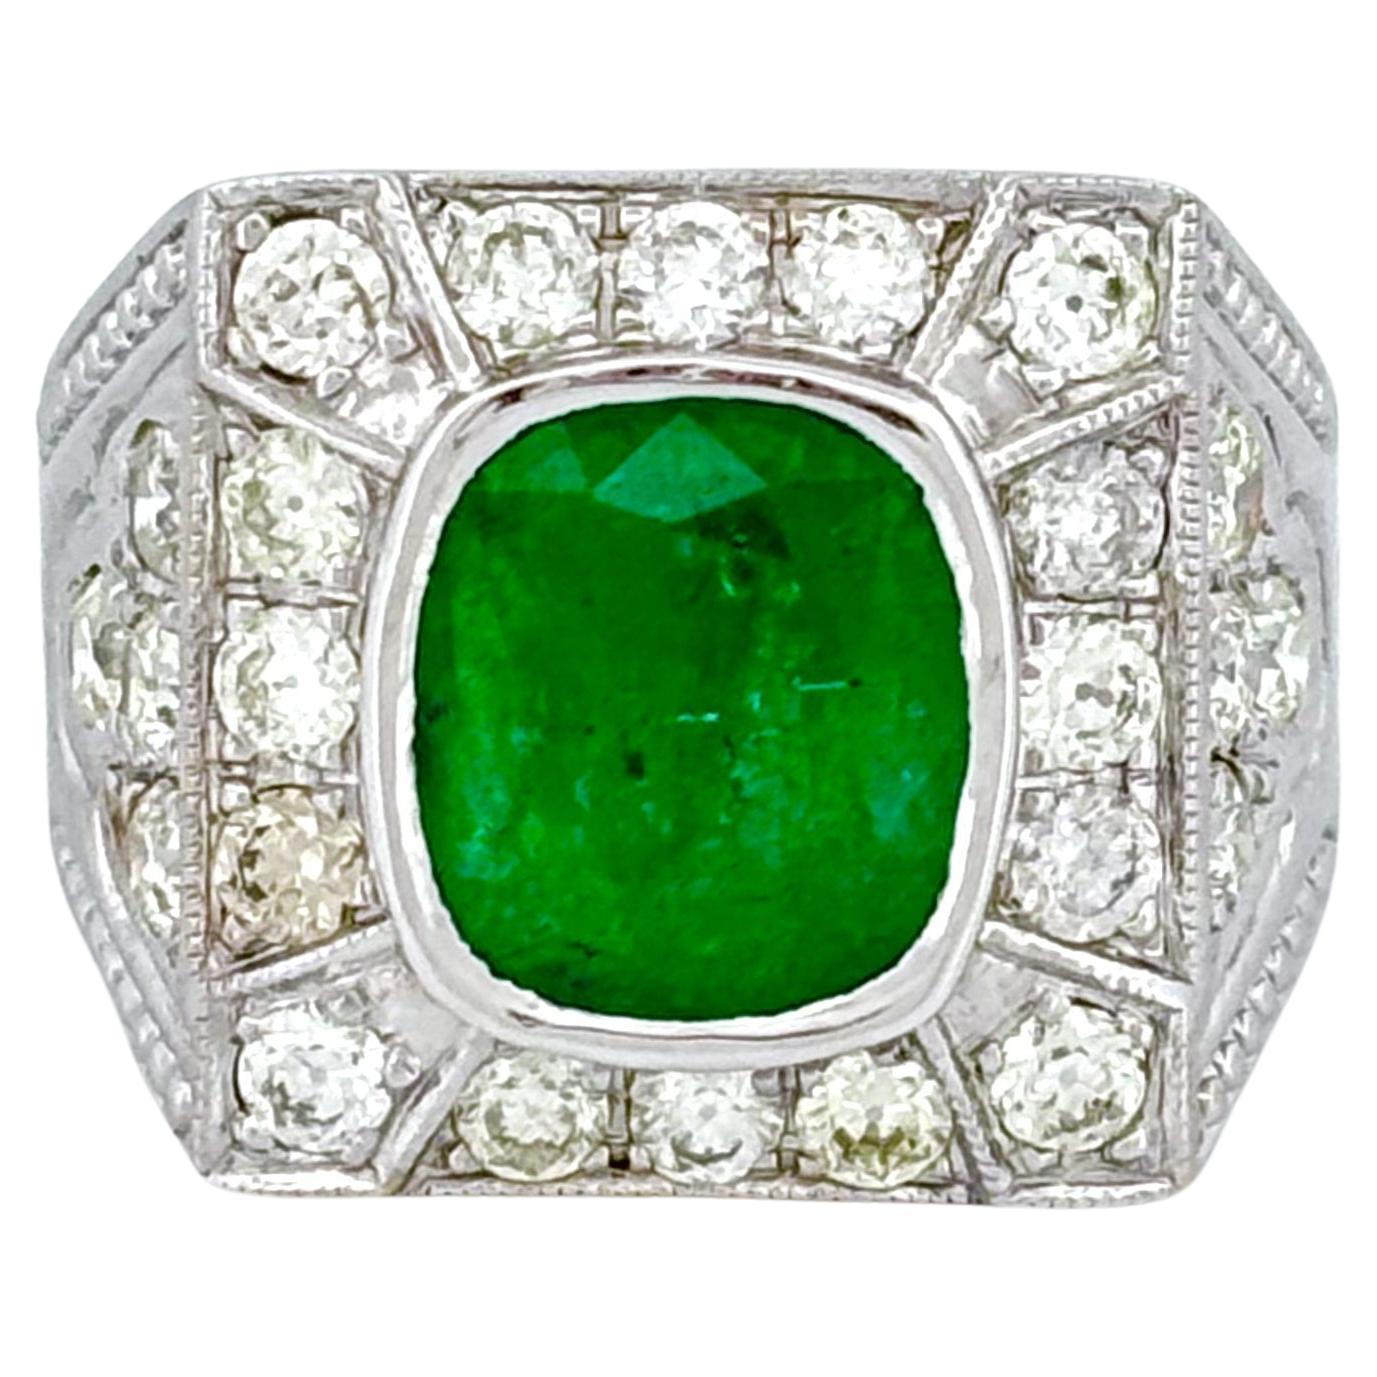 2.66 ct Zambian Emerald Art Deco Ring with Old Cut Diamonds in 18K Gold For Sale